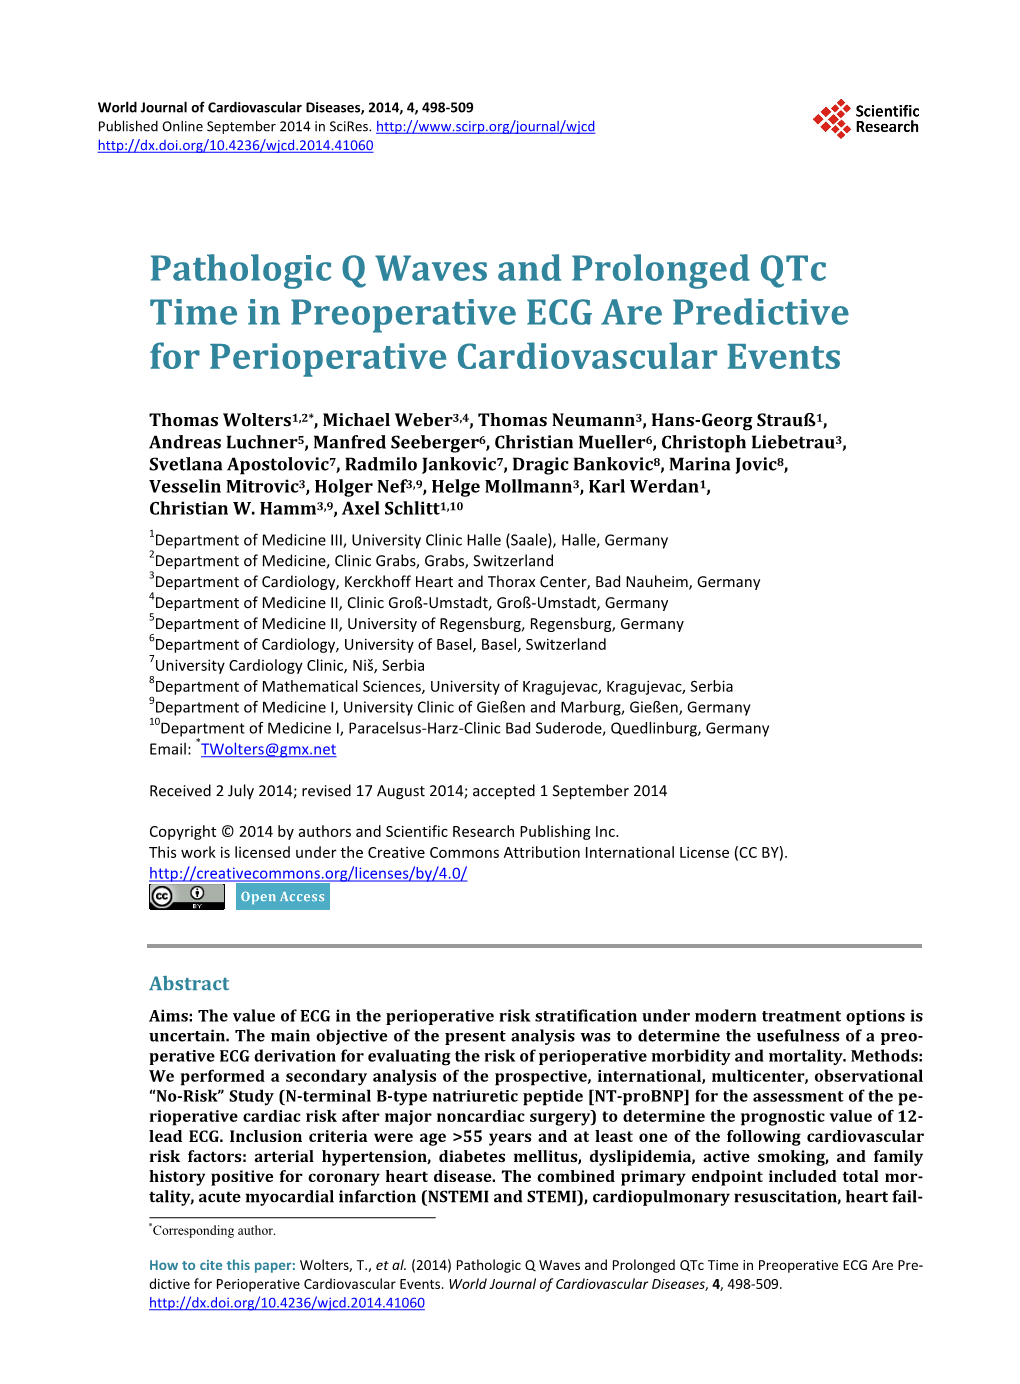 Pathologic Q Waves and Prolonged Qtc Time in Preoperative ECG Are Predictive for Perioperative Cardiovascular Events